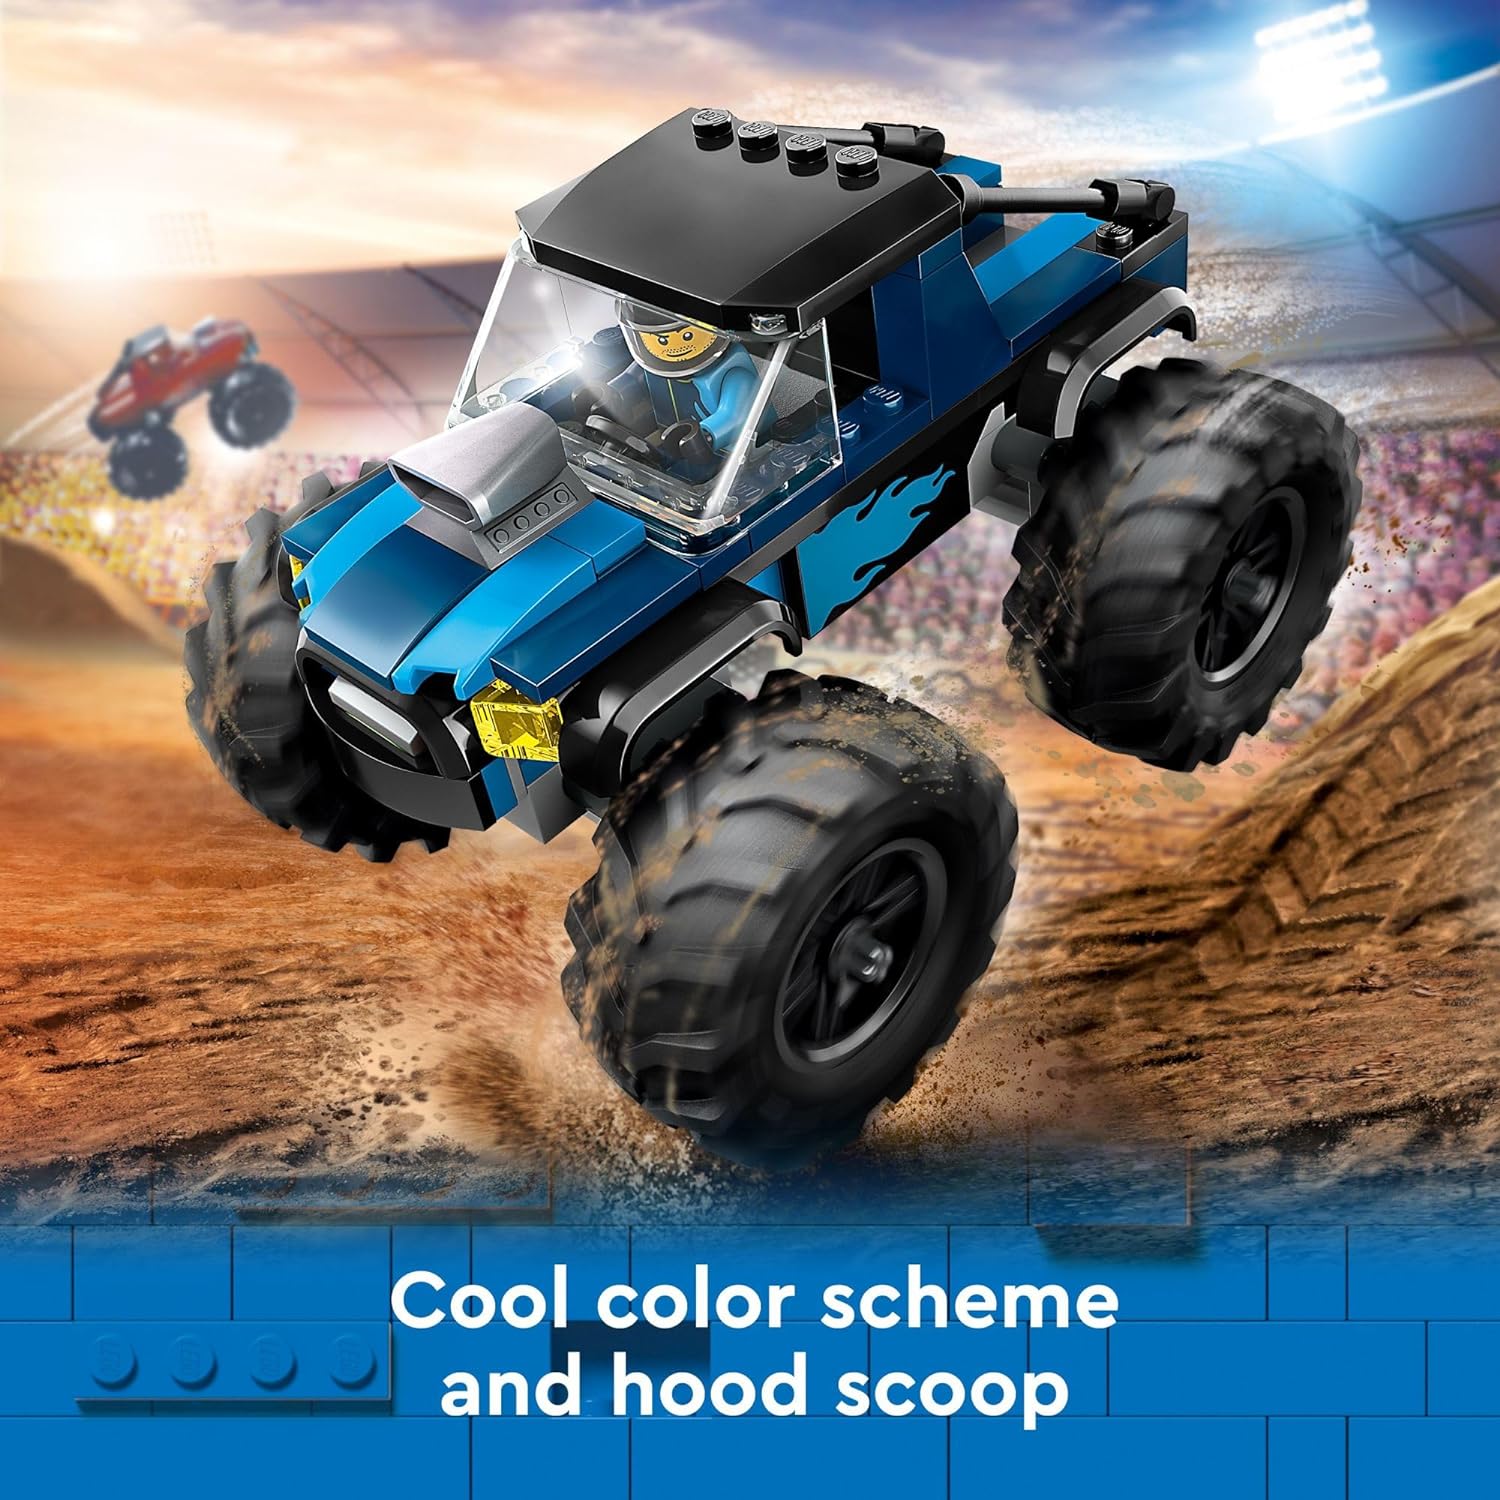 LEGO 60402 City Blue Monster Truck Off-Road Toy Playset with a Driver Minifigure, Imaginative Toys for Kids, Fun Gift for Boys and Girls Aged 5 Plus, Mini Monster Truck.